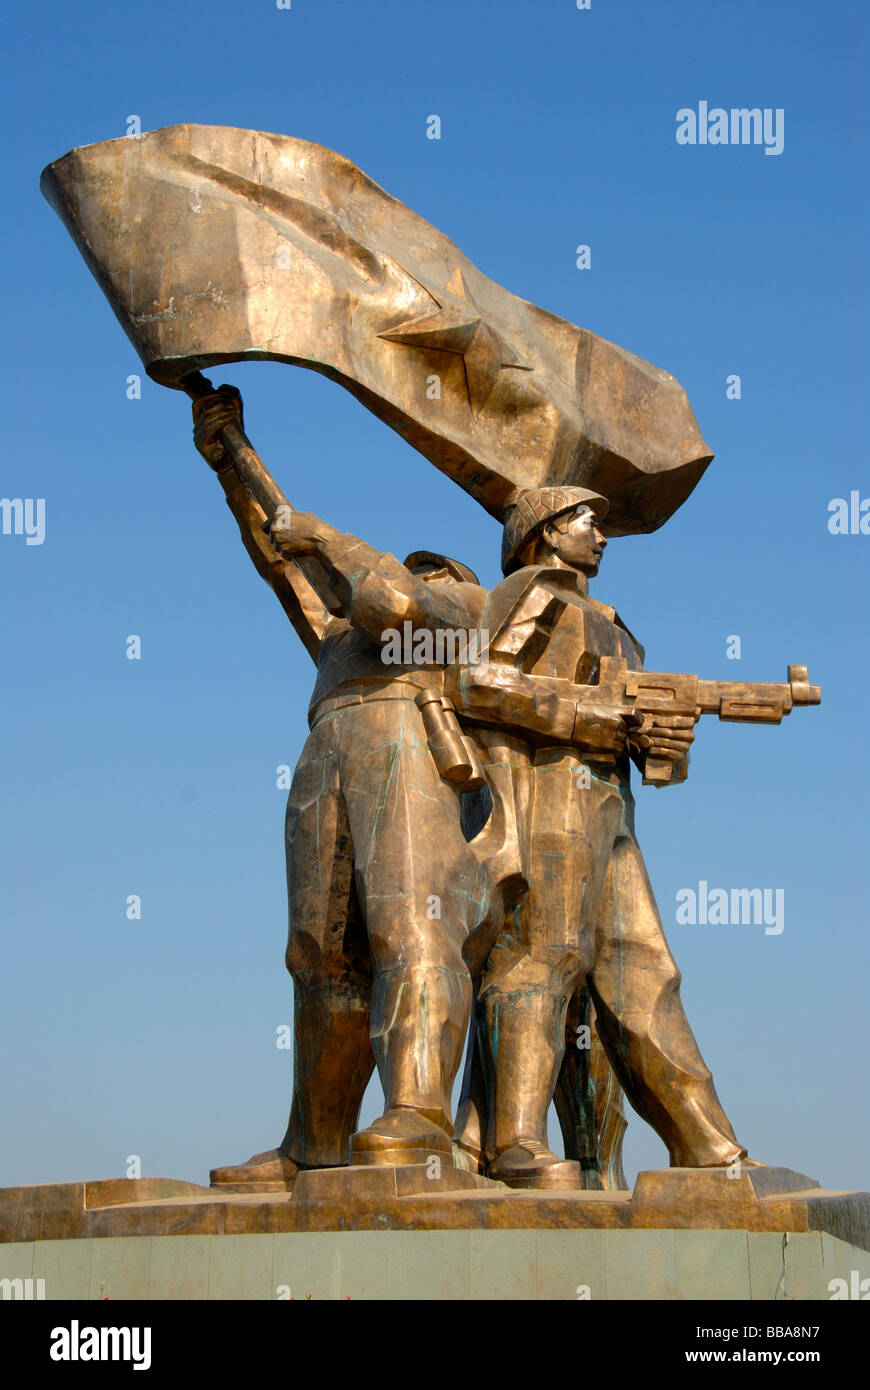 First Indochina War 1954, large bronze monument of the victory of the Viet Minh, Dien Bien Phu, Vietnam, Southeast Asia, Asia Stock Photo